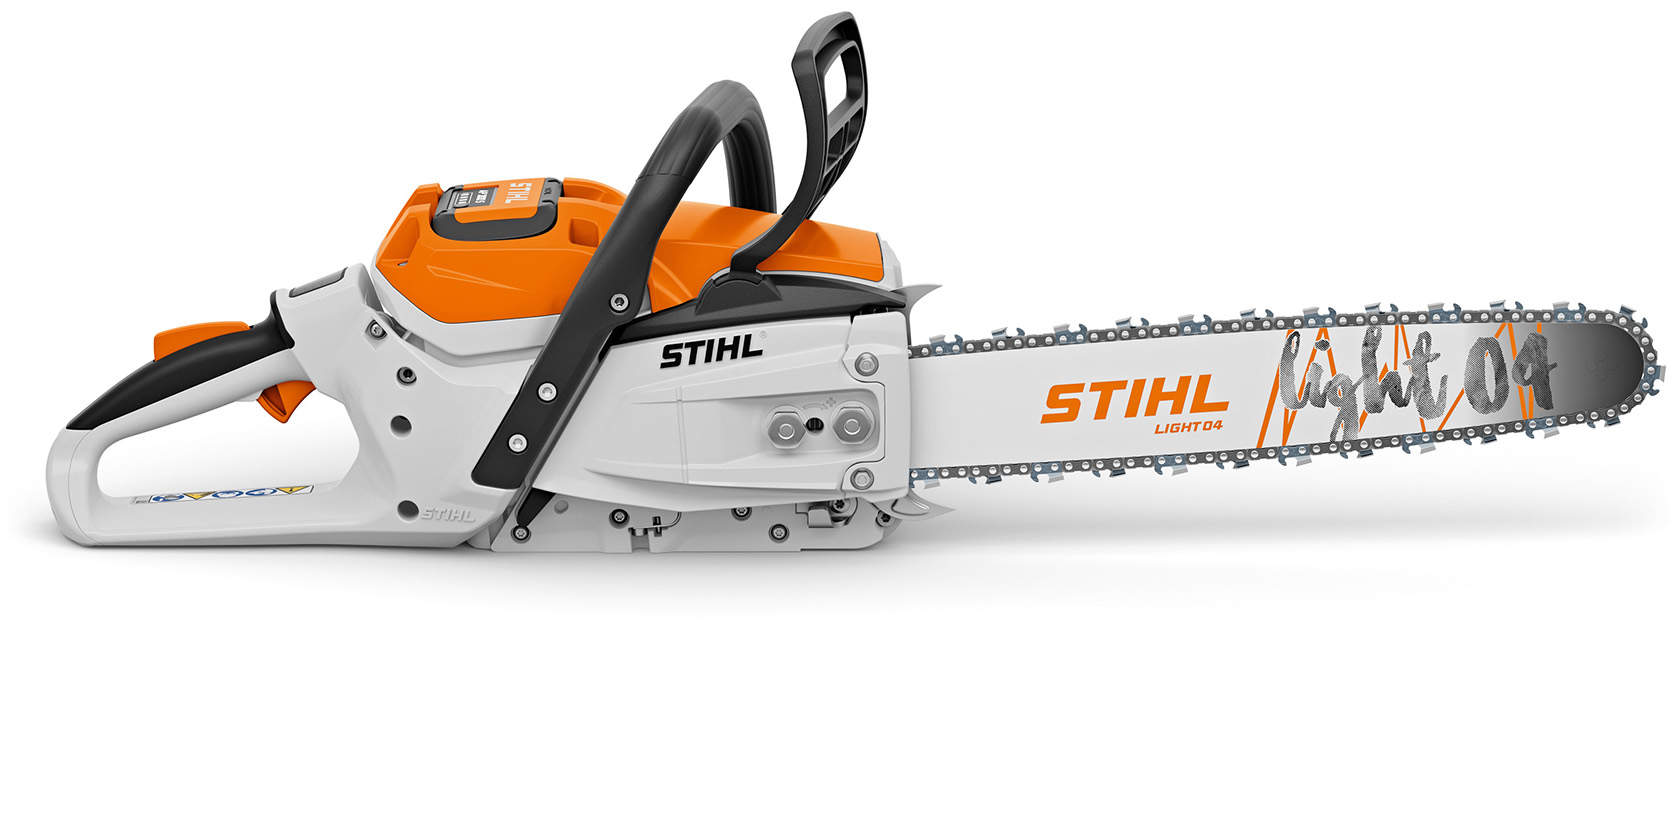 The STIHL MSA 300 is currently the most powerful cordless chainsaw on the market